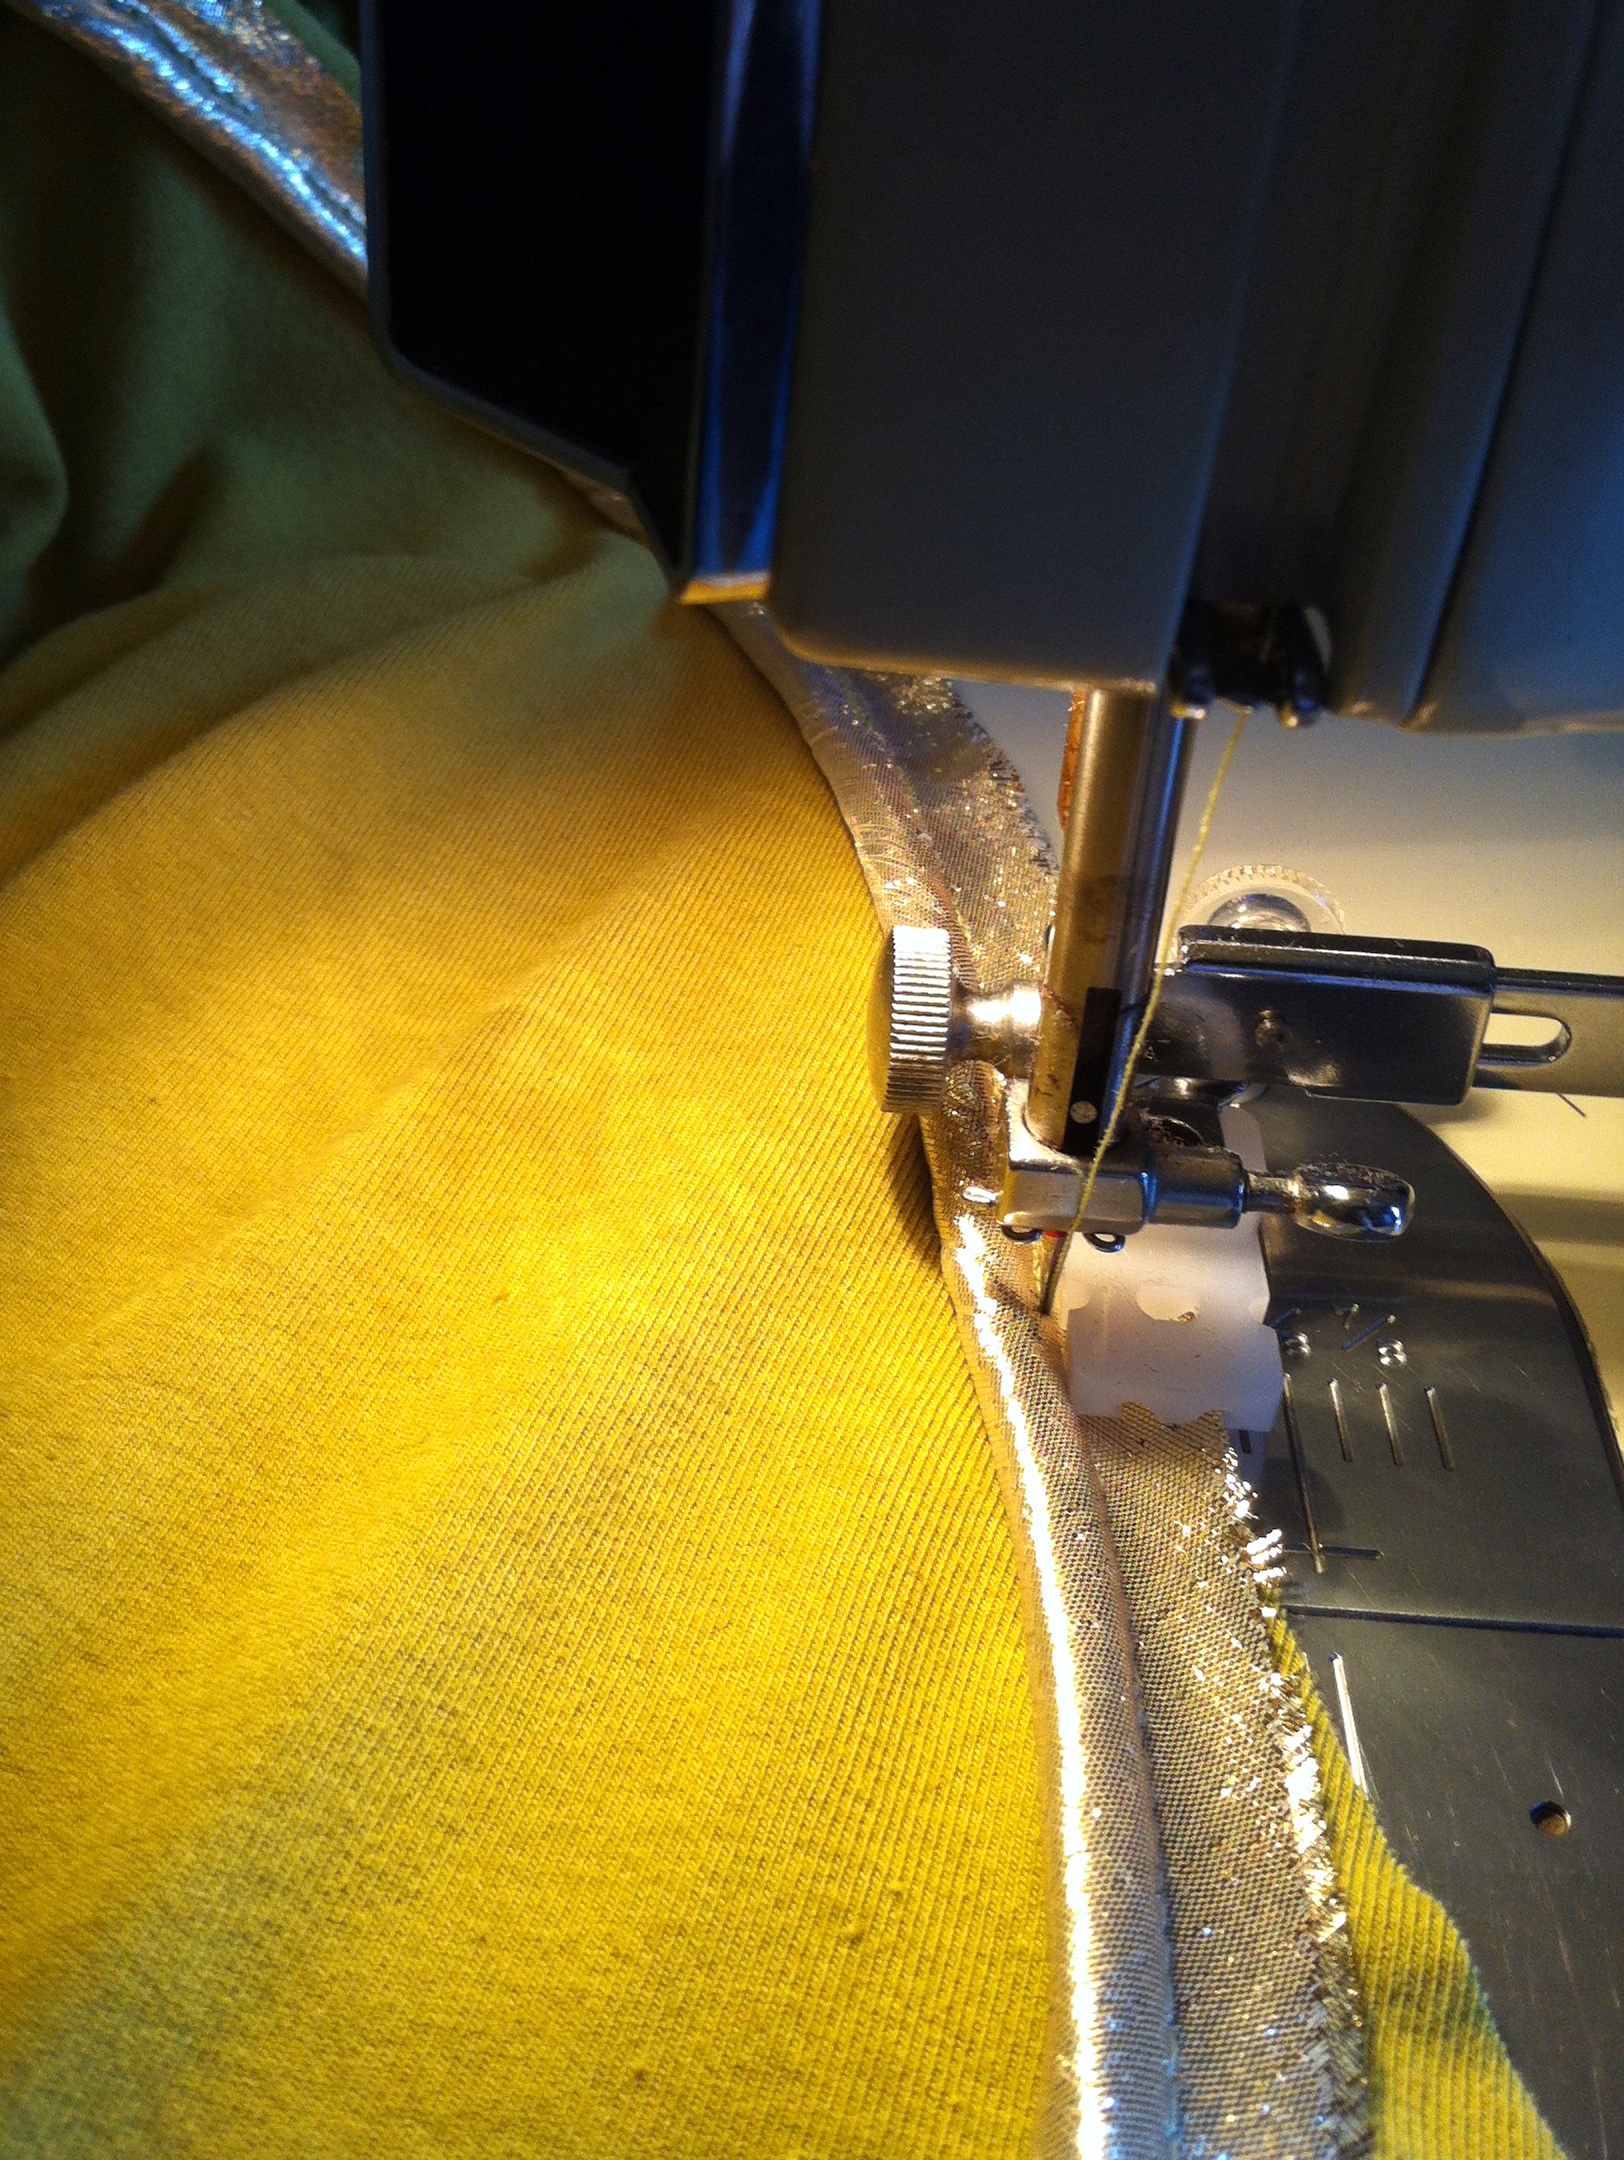 a view of the sewing machine stitching on a fabric